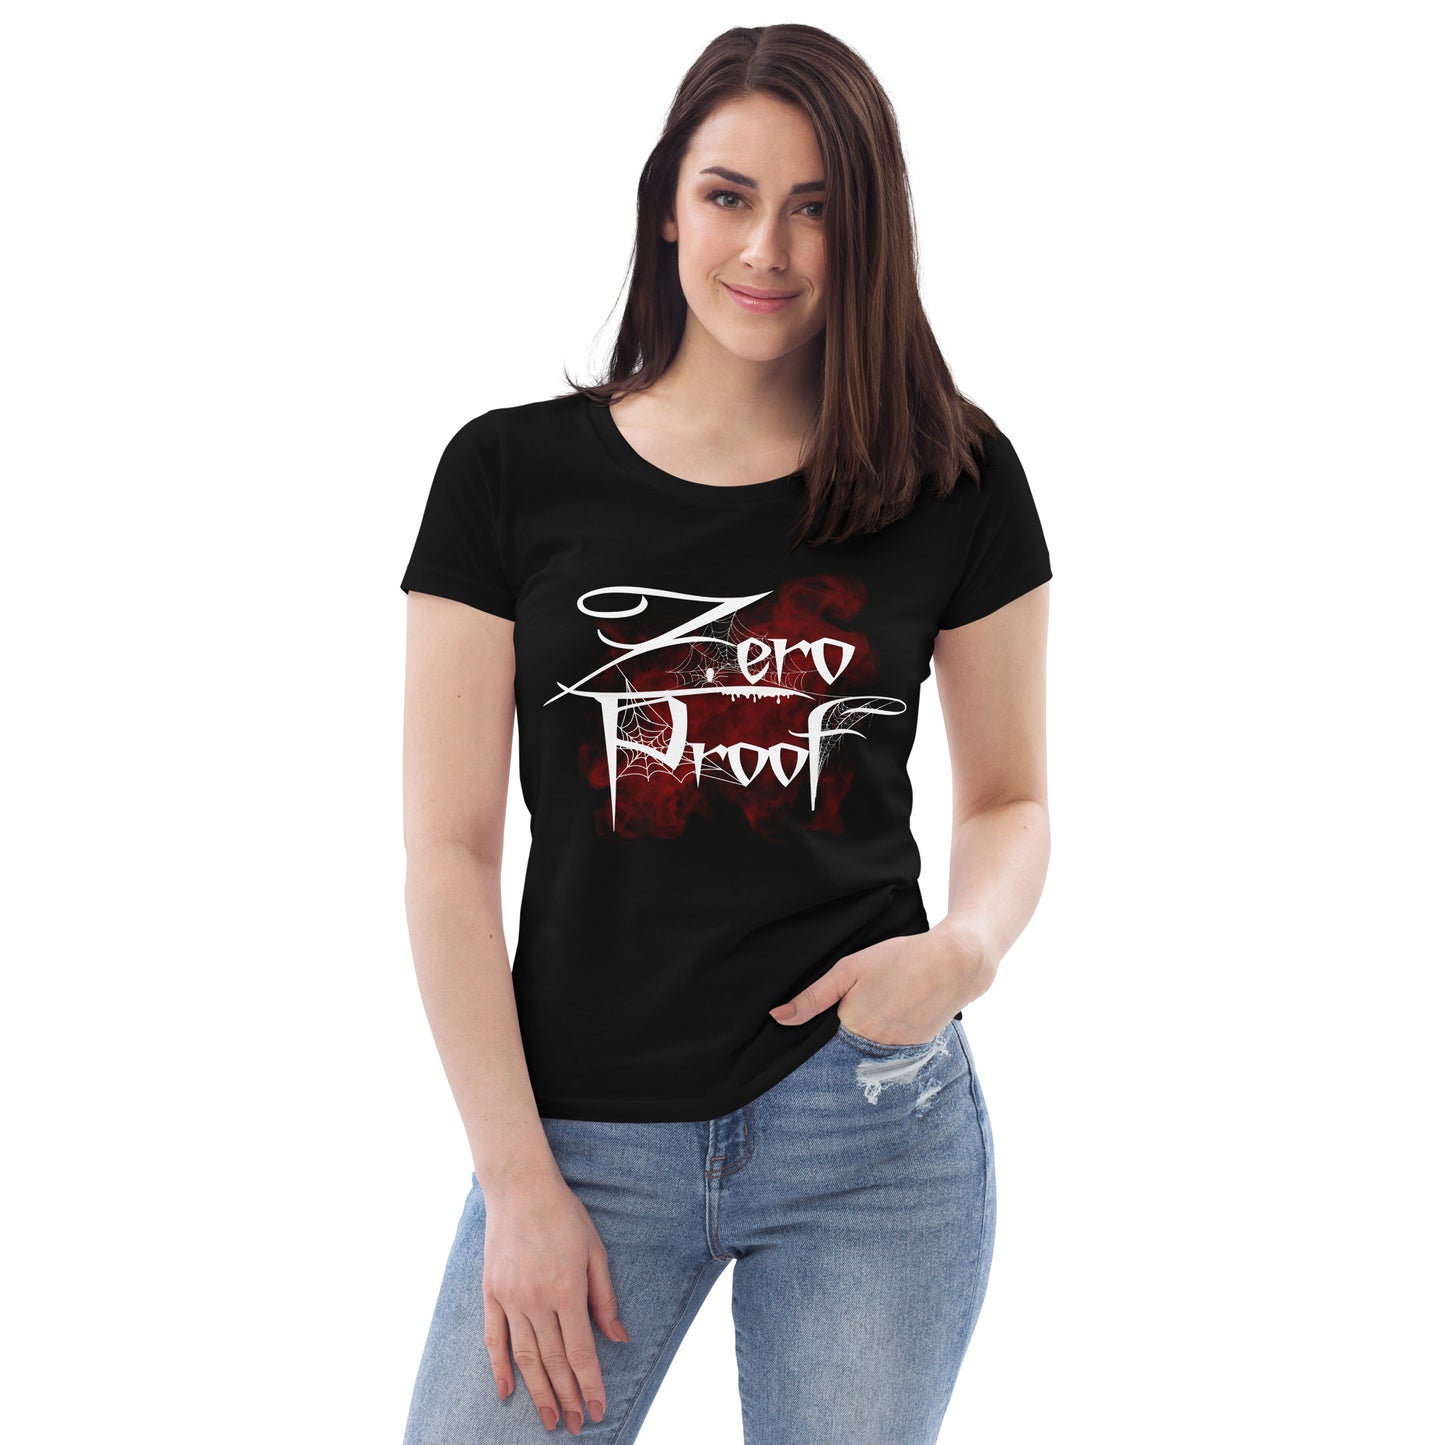 Zero Proof Red Mist - Women's fitted eco tee